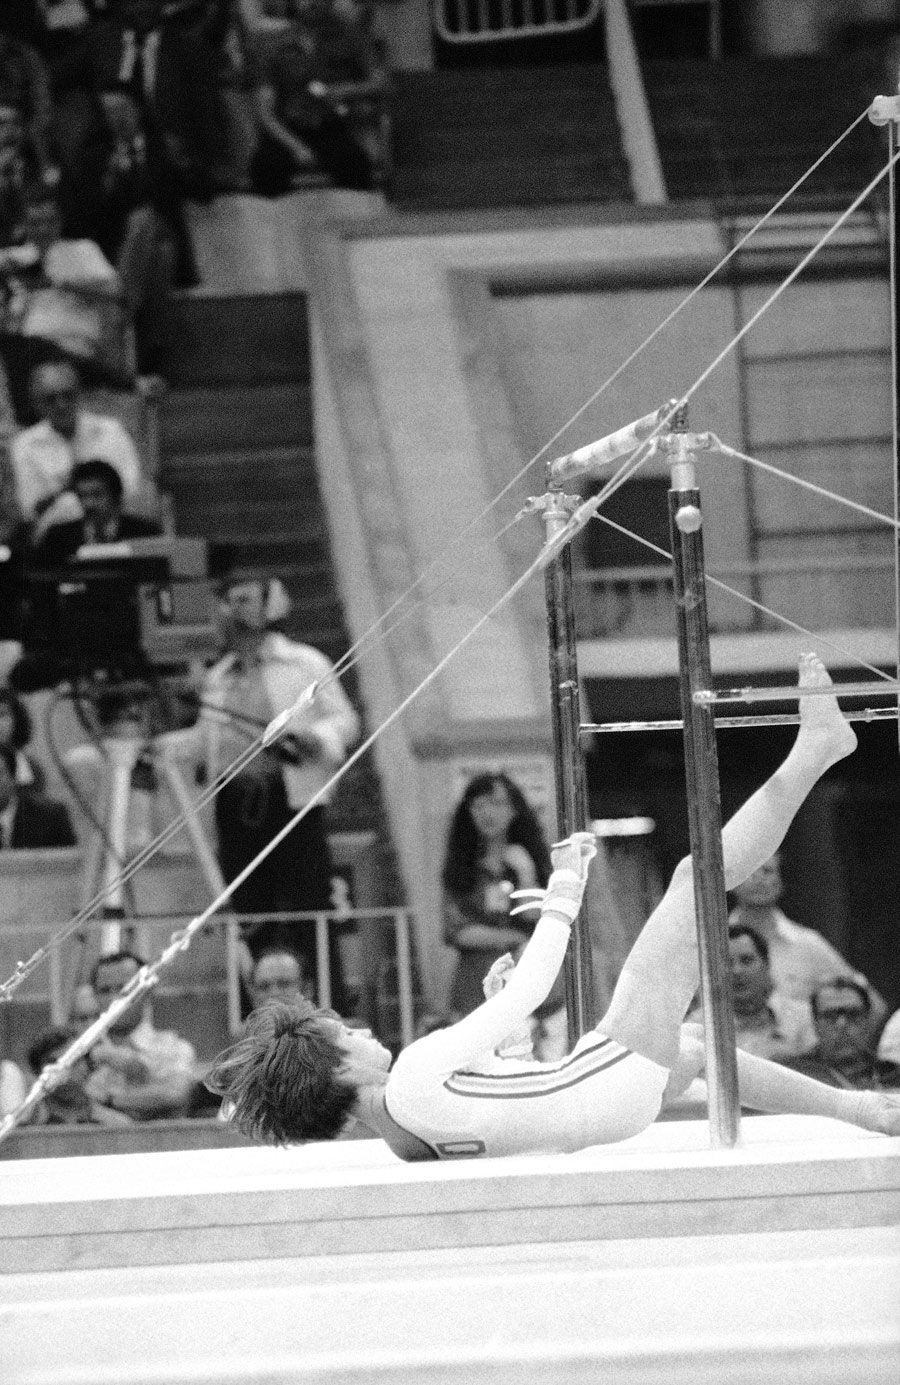 Nadia Comaneci won two gold medals but missed out on the uneven bars after taking a tumble